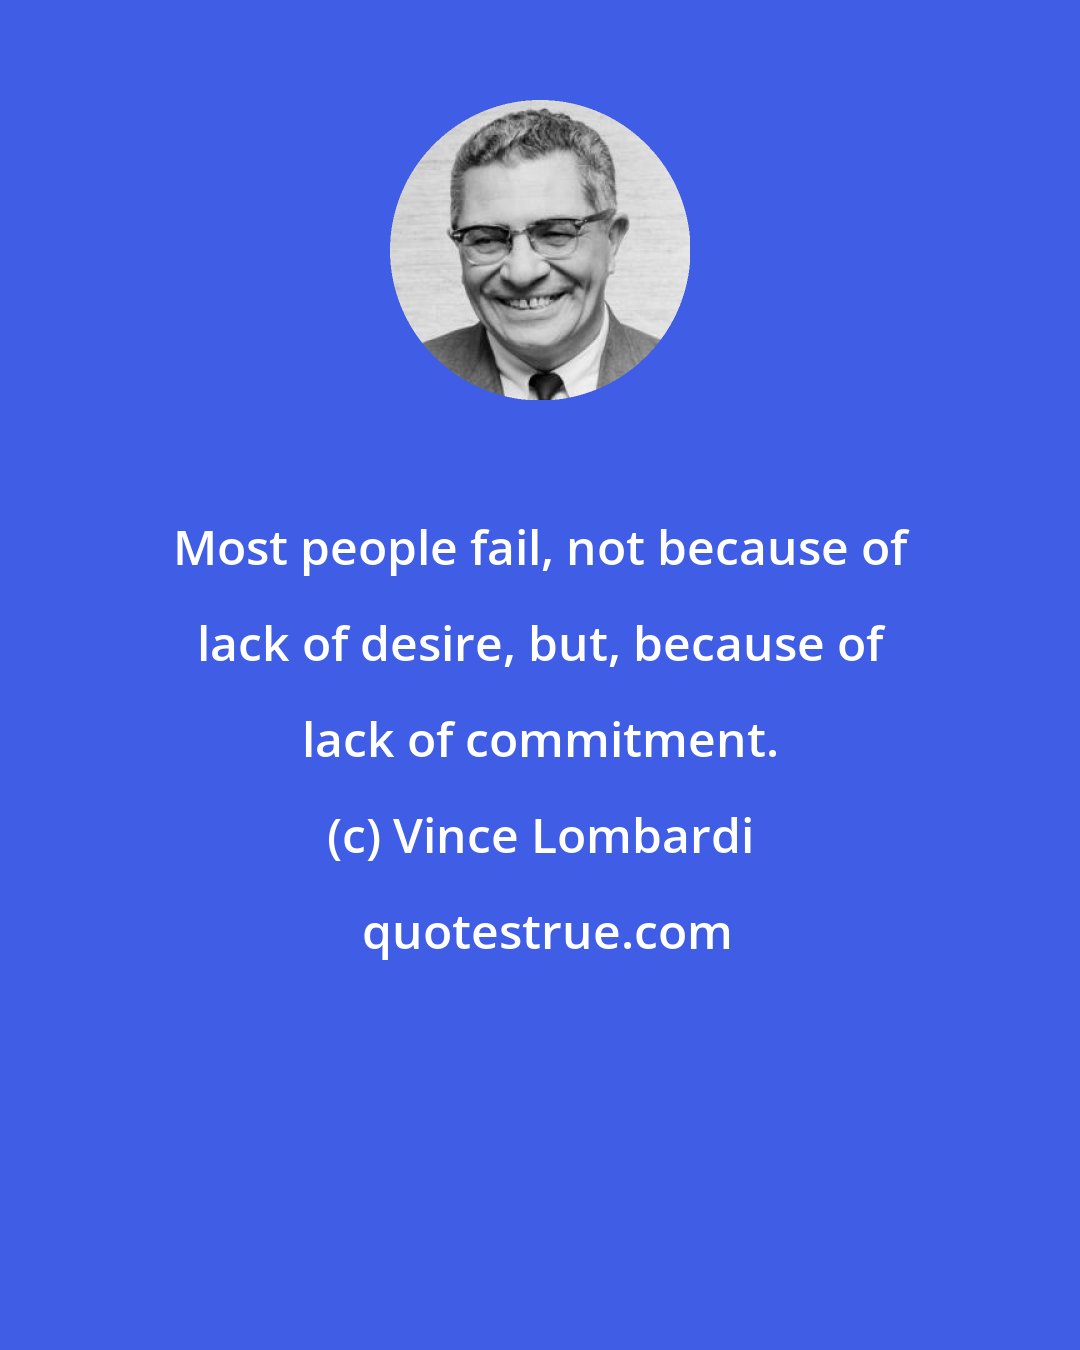 Vince Lombardi: Most people fail, not because of lack of desire, but, because of lack of commitment.